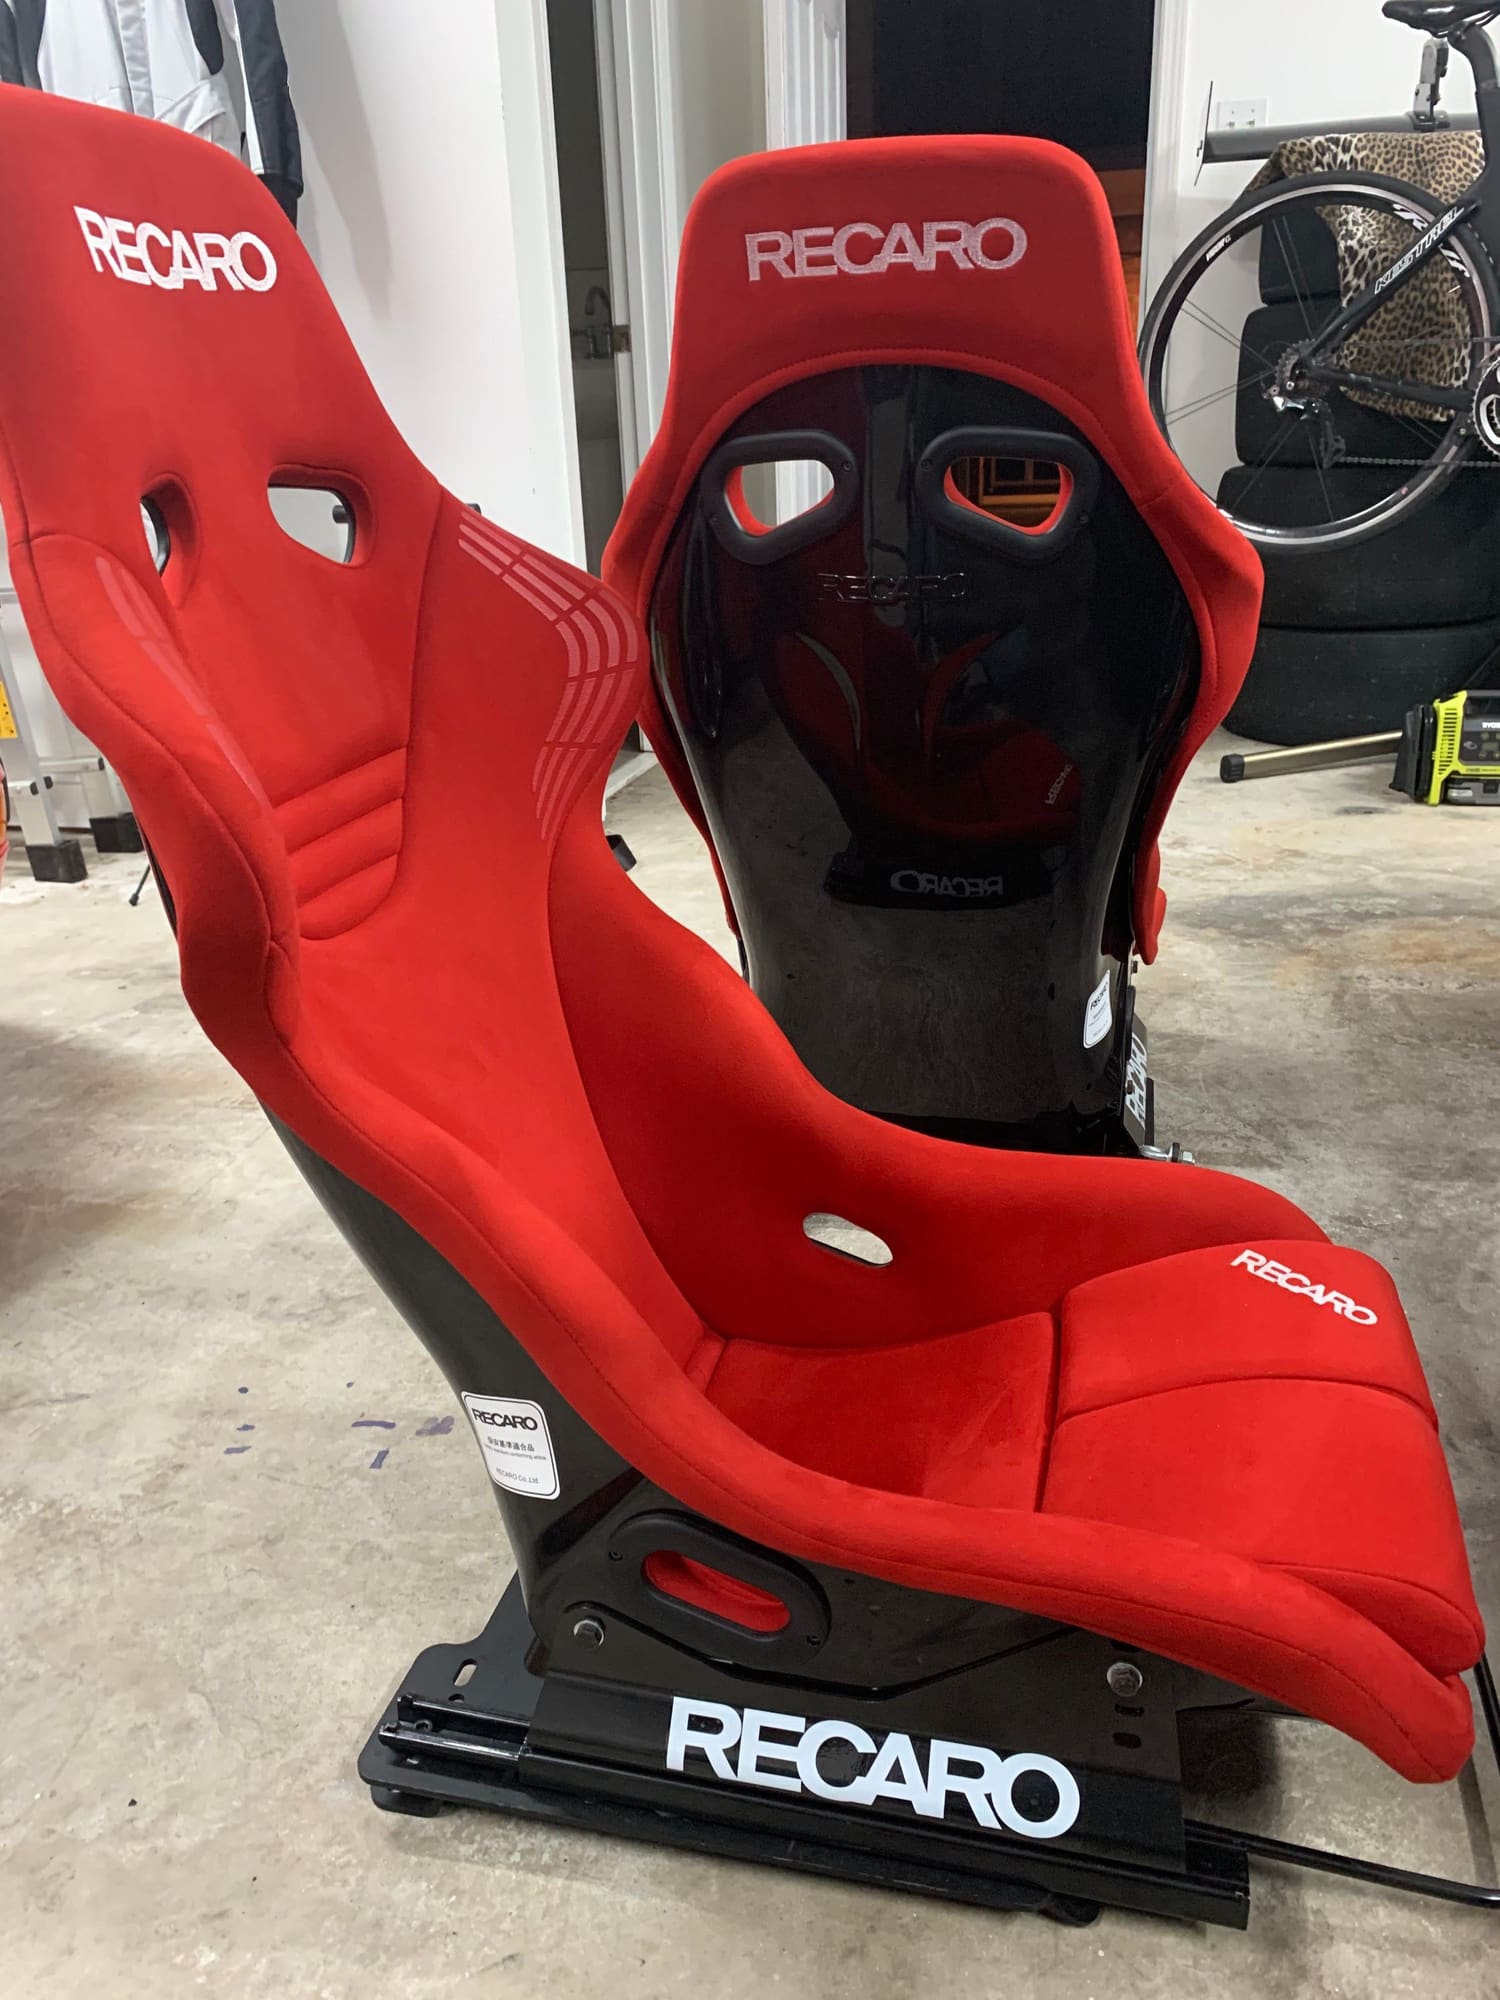 2015 Porsche GT3 - .Recaro RS-GS - Red Kamui (Left & Right side) - Accessories - $1,000 - New Orleans, LA 70002, United States